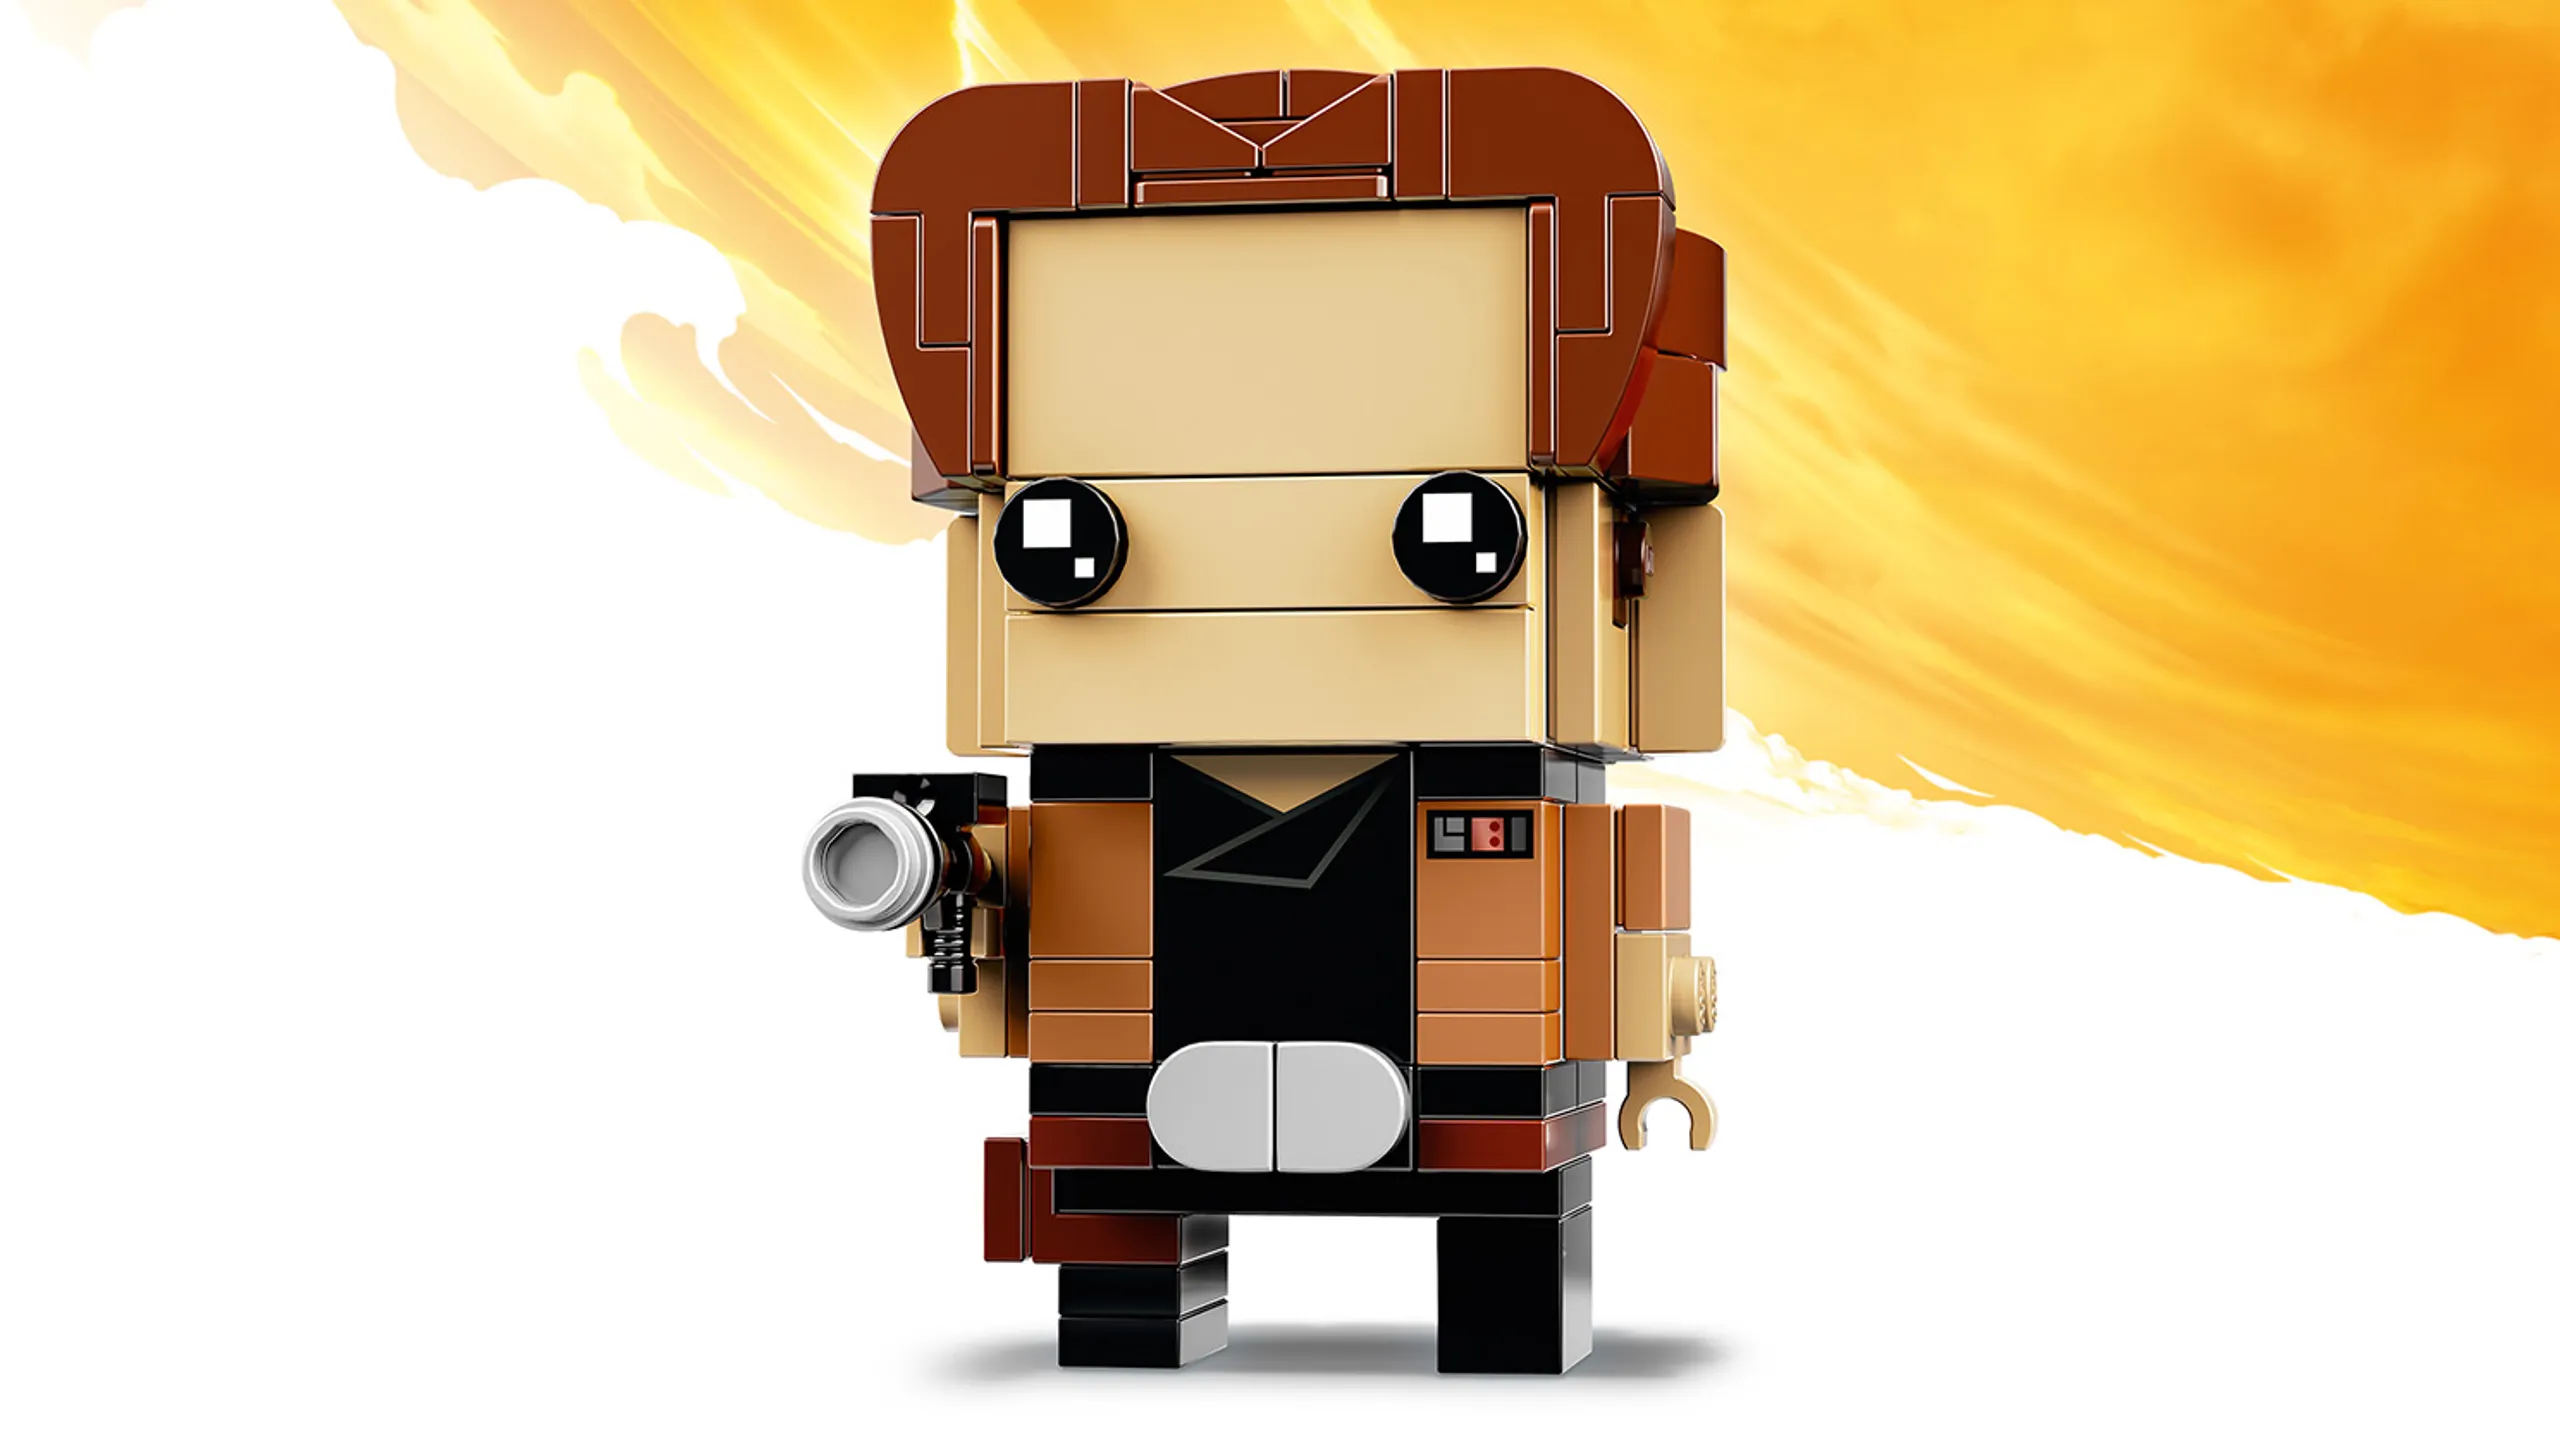 LEGO Brickheadz - 41608 Han Solo - Build a LEGO Brickheadz figure of Han Solo from the Star Wars saga. Check out his iconic brown jacket, utility belt and trusty blaster!